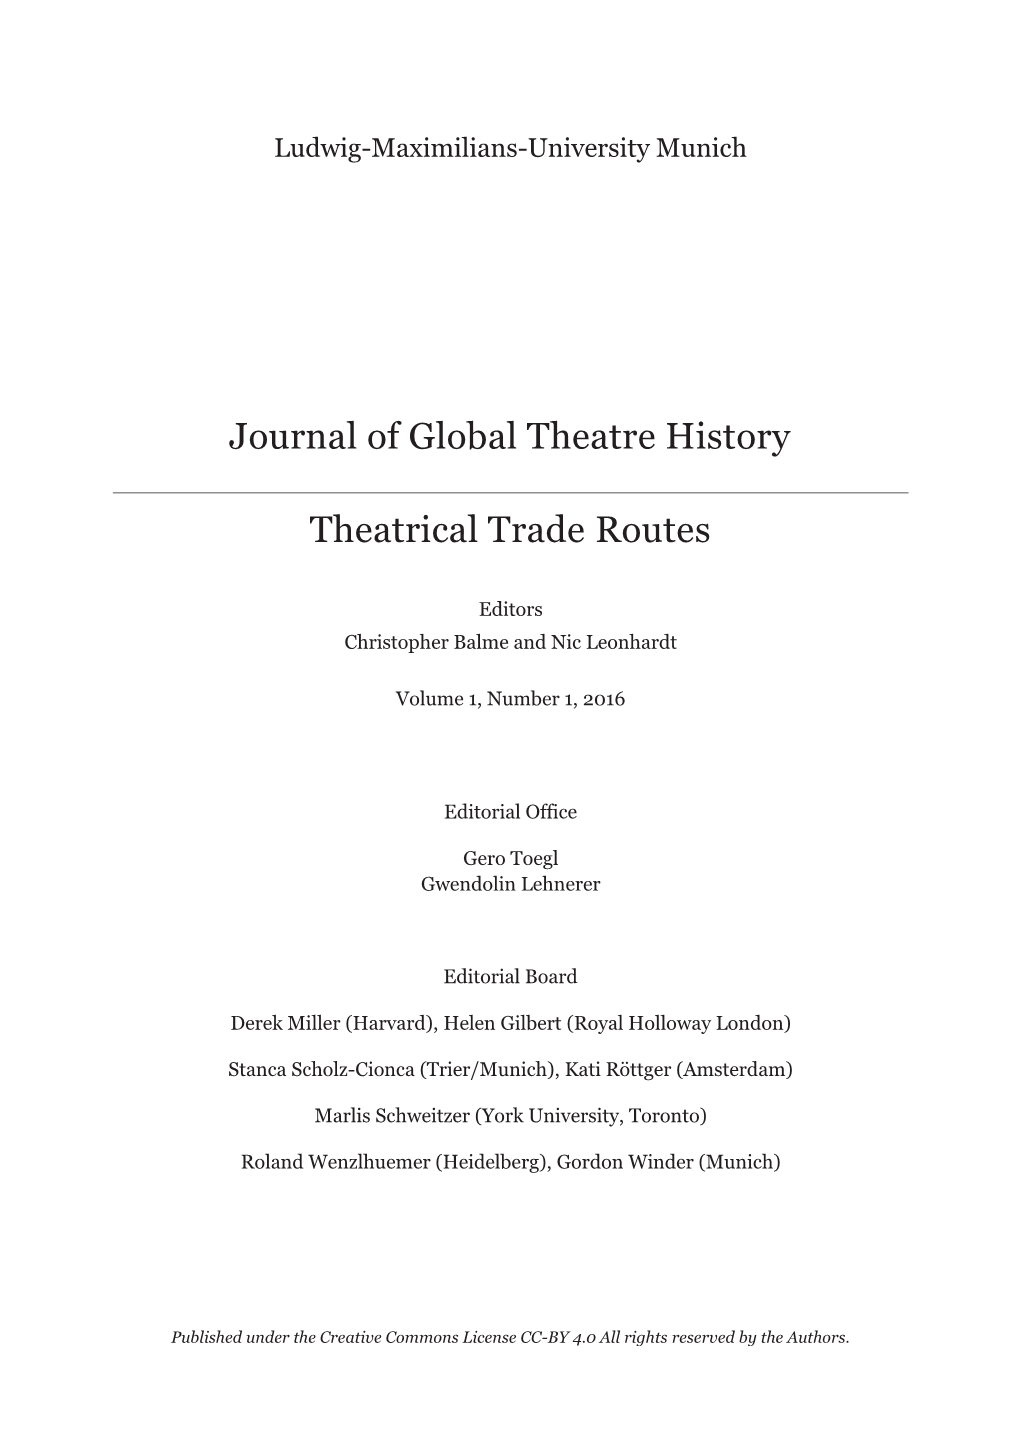 GTHJ Issue1 Number1 Theatri